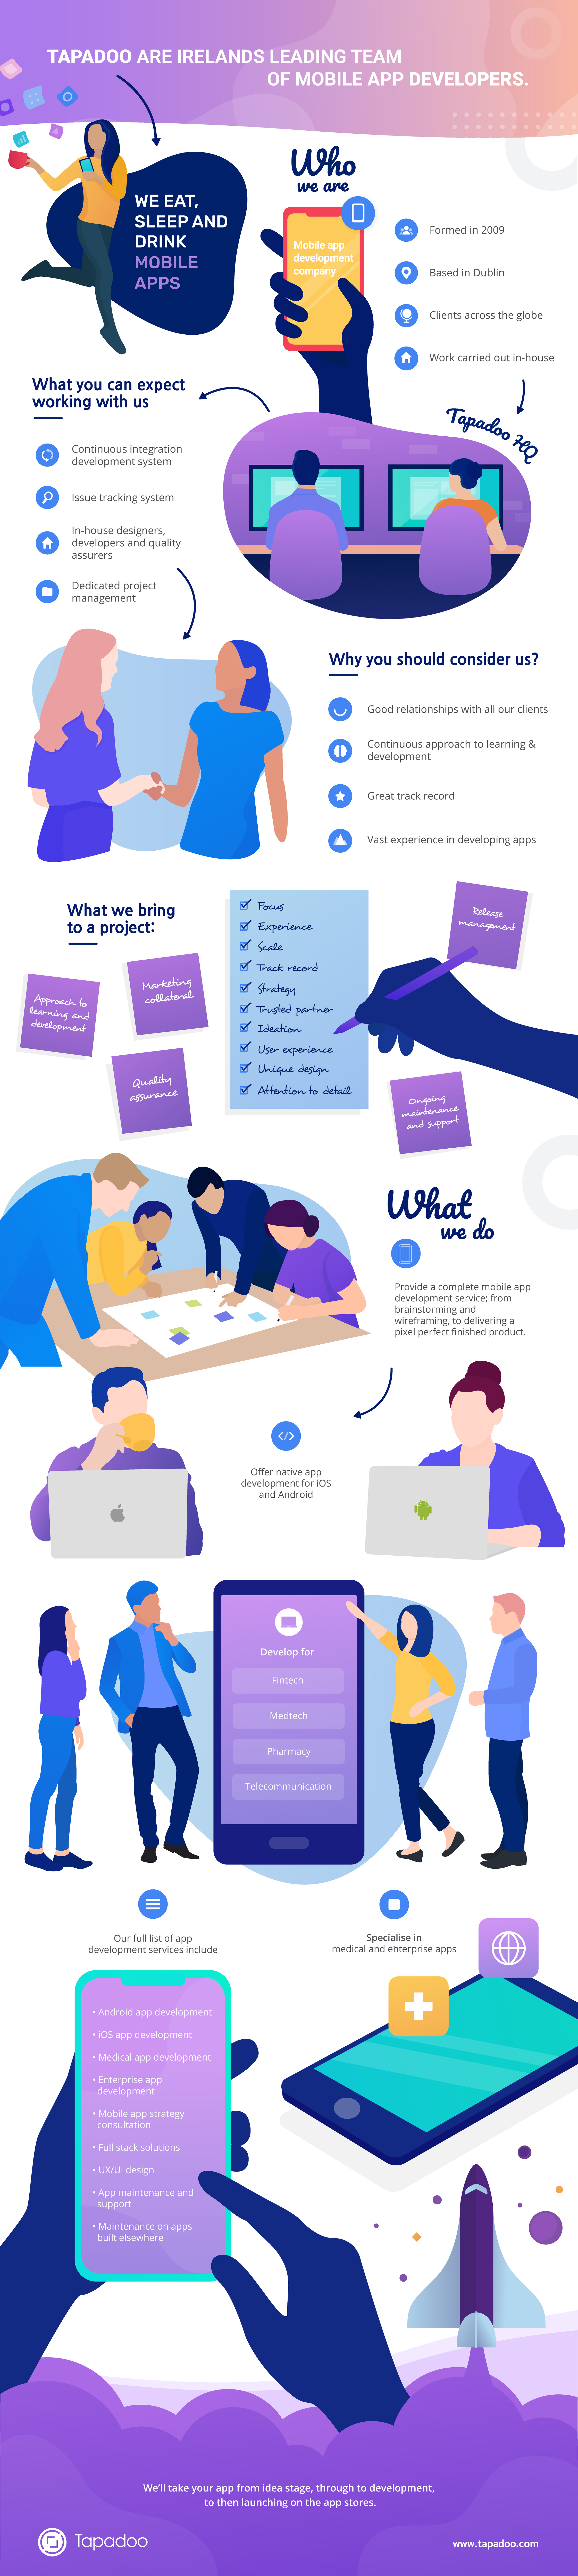 App Developers. Infographic on Tapadoo's leading team of app developers. 